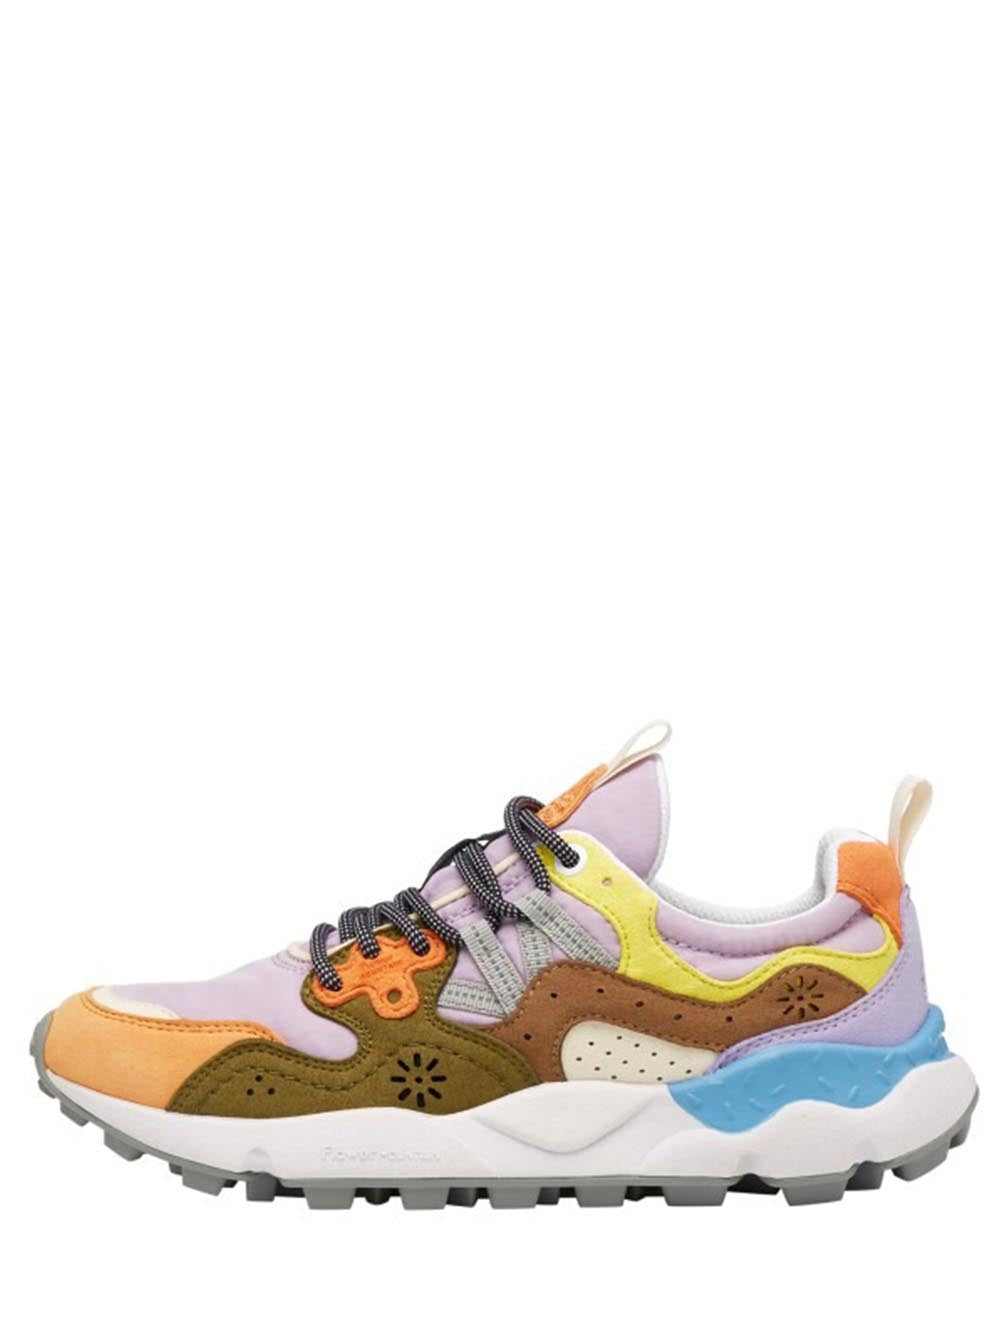 Flower Mountain Sneakers Donna Yamano 3 Woman Kaiso 2018337.01 Multicolor